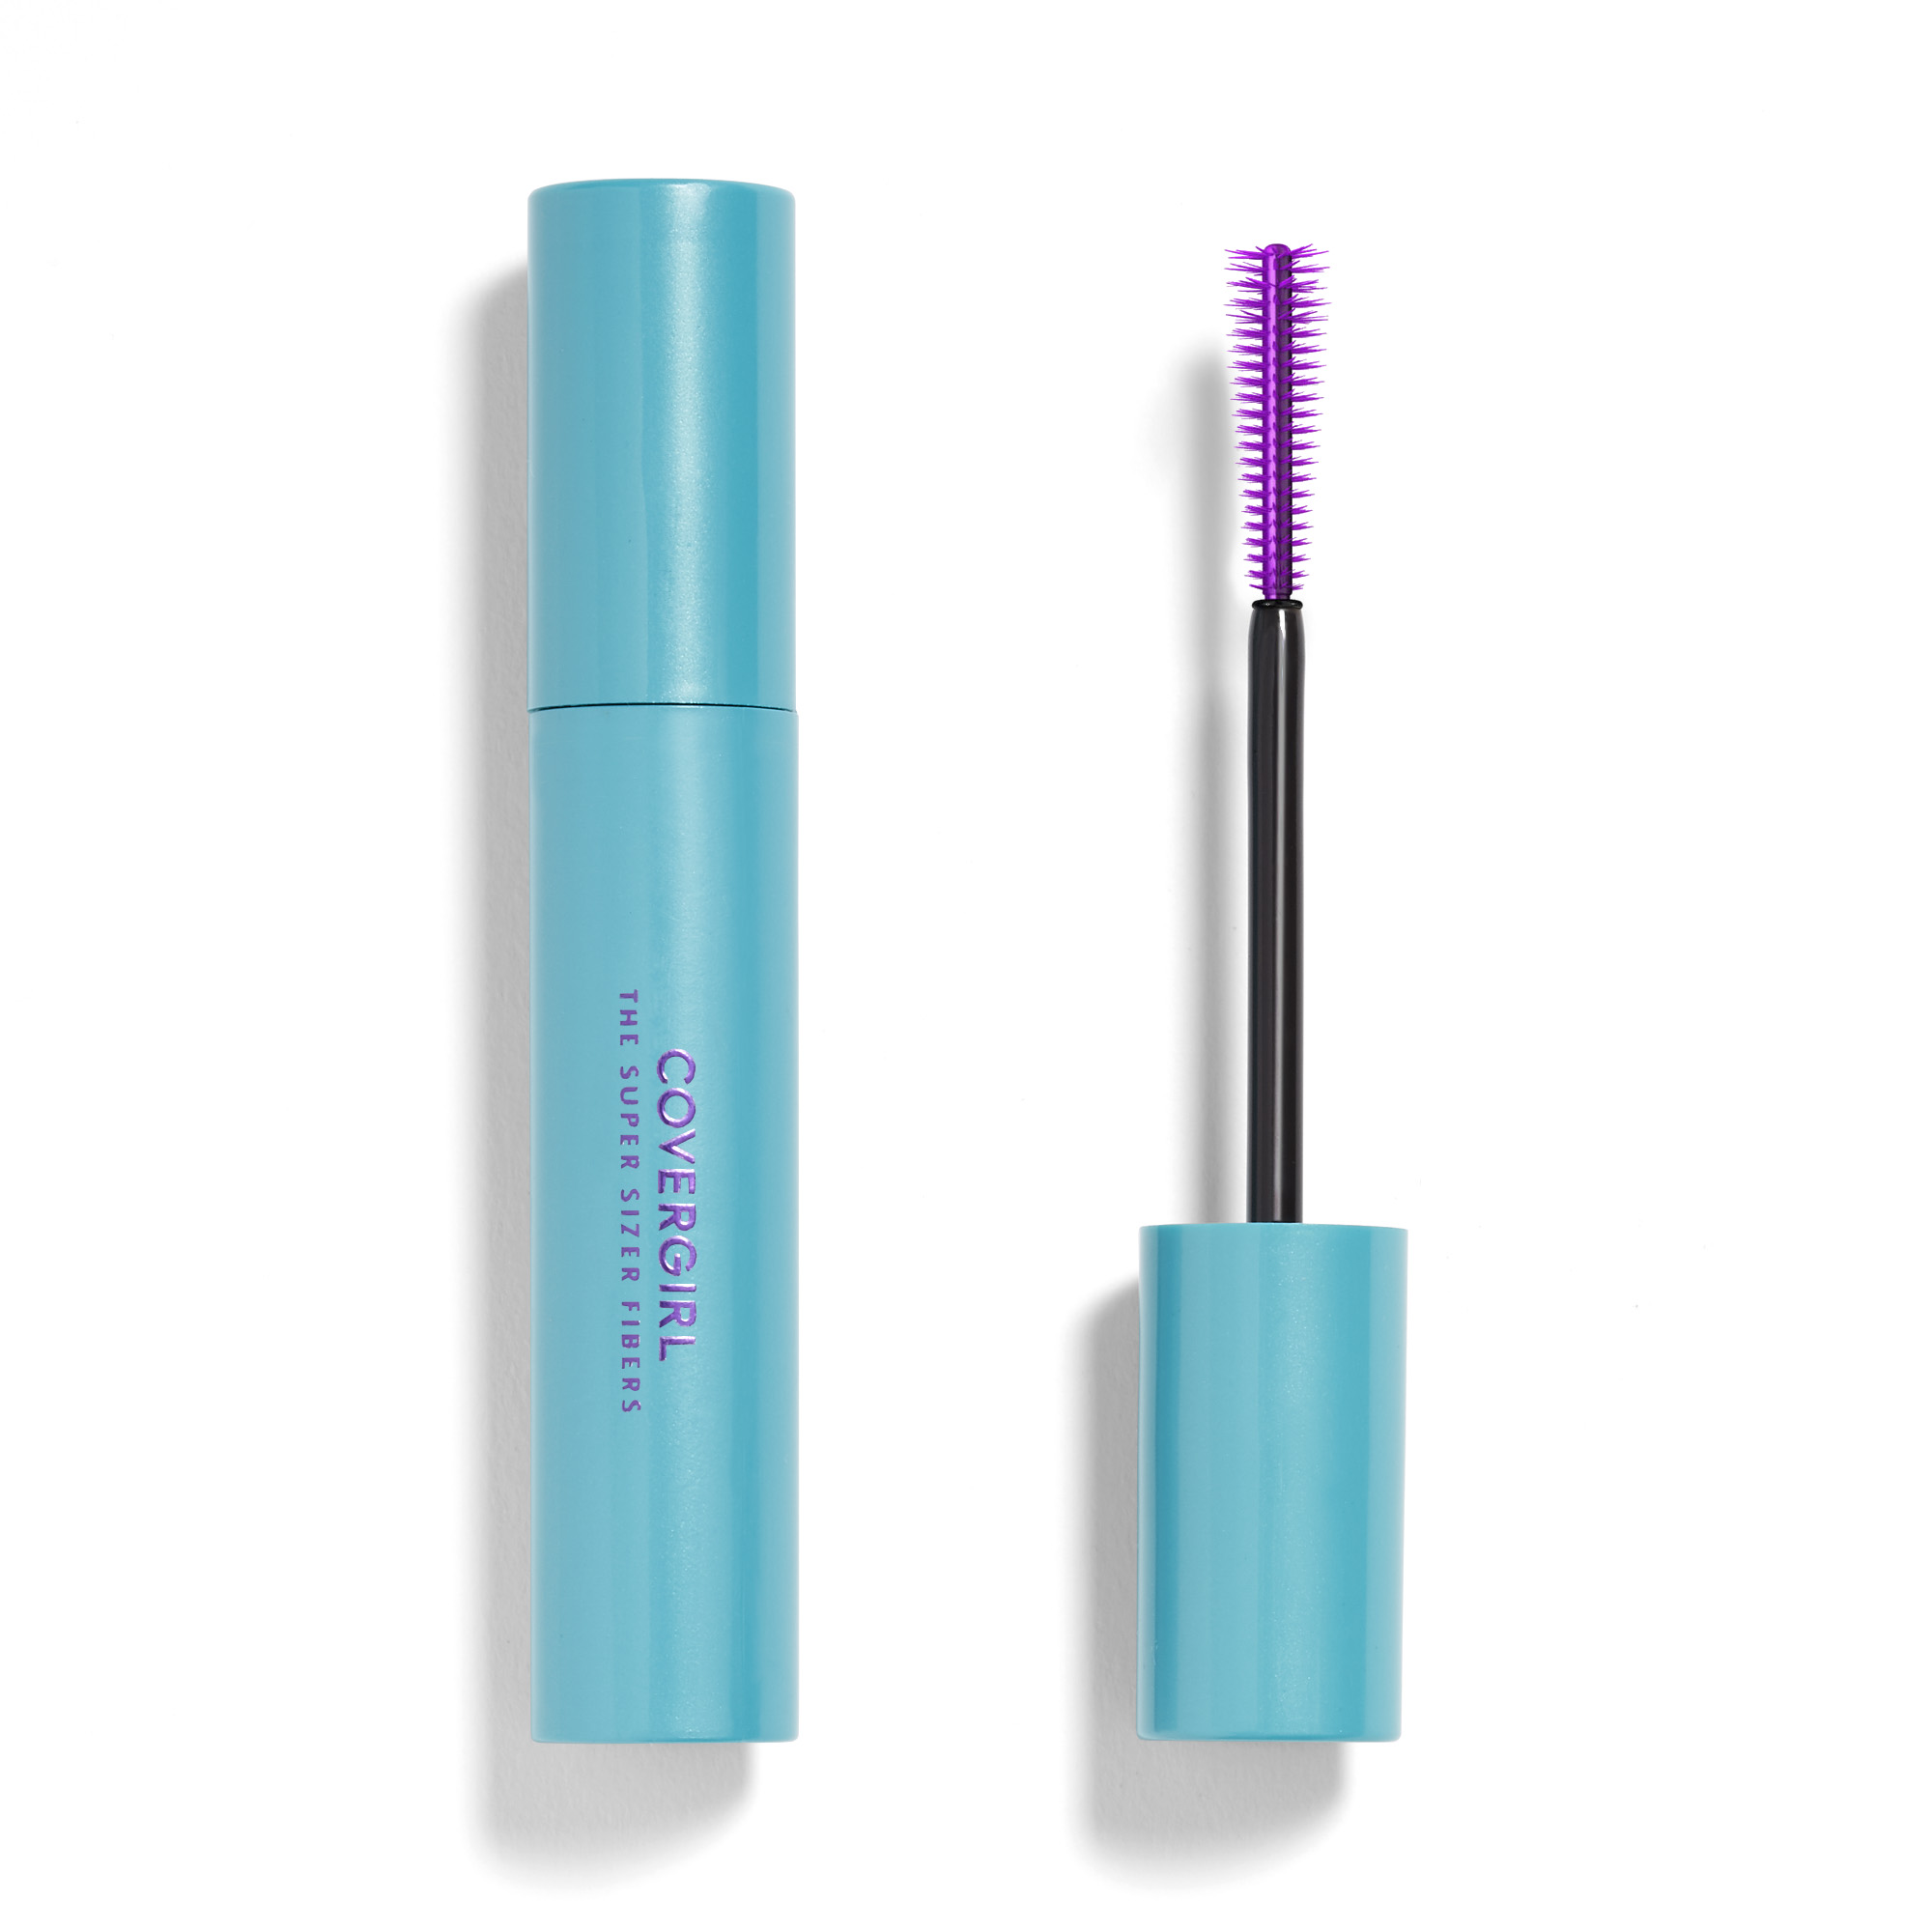 COVERGIRL The Super Sizer Fibers Mascara, 800 Very Black - image 1 of 8